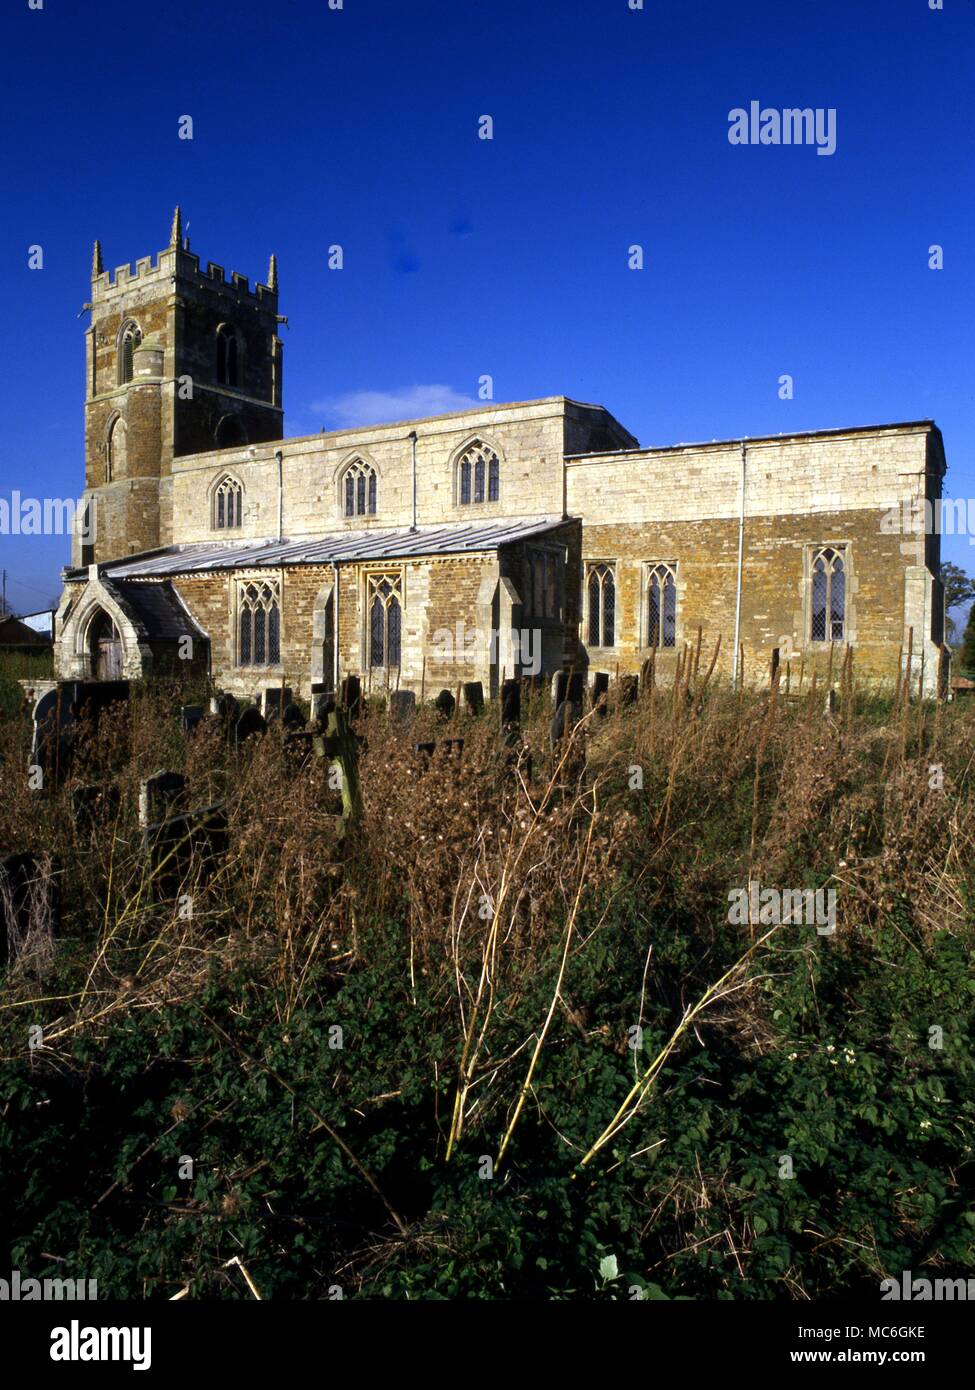 Leics. Edmonthorpe Parish Church which houses the effigy of a supposed witch. Stock Photo